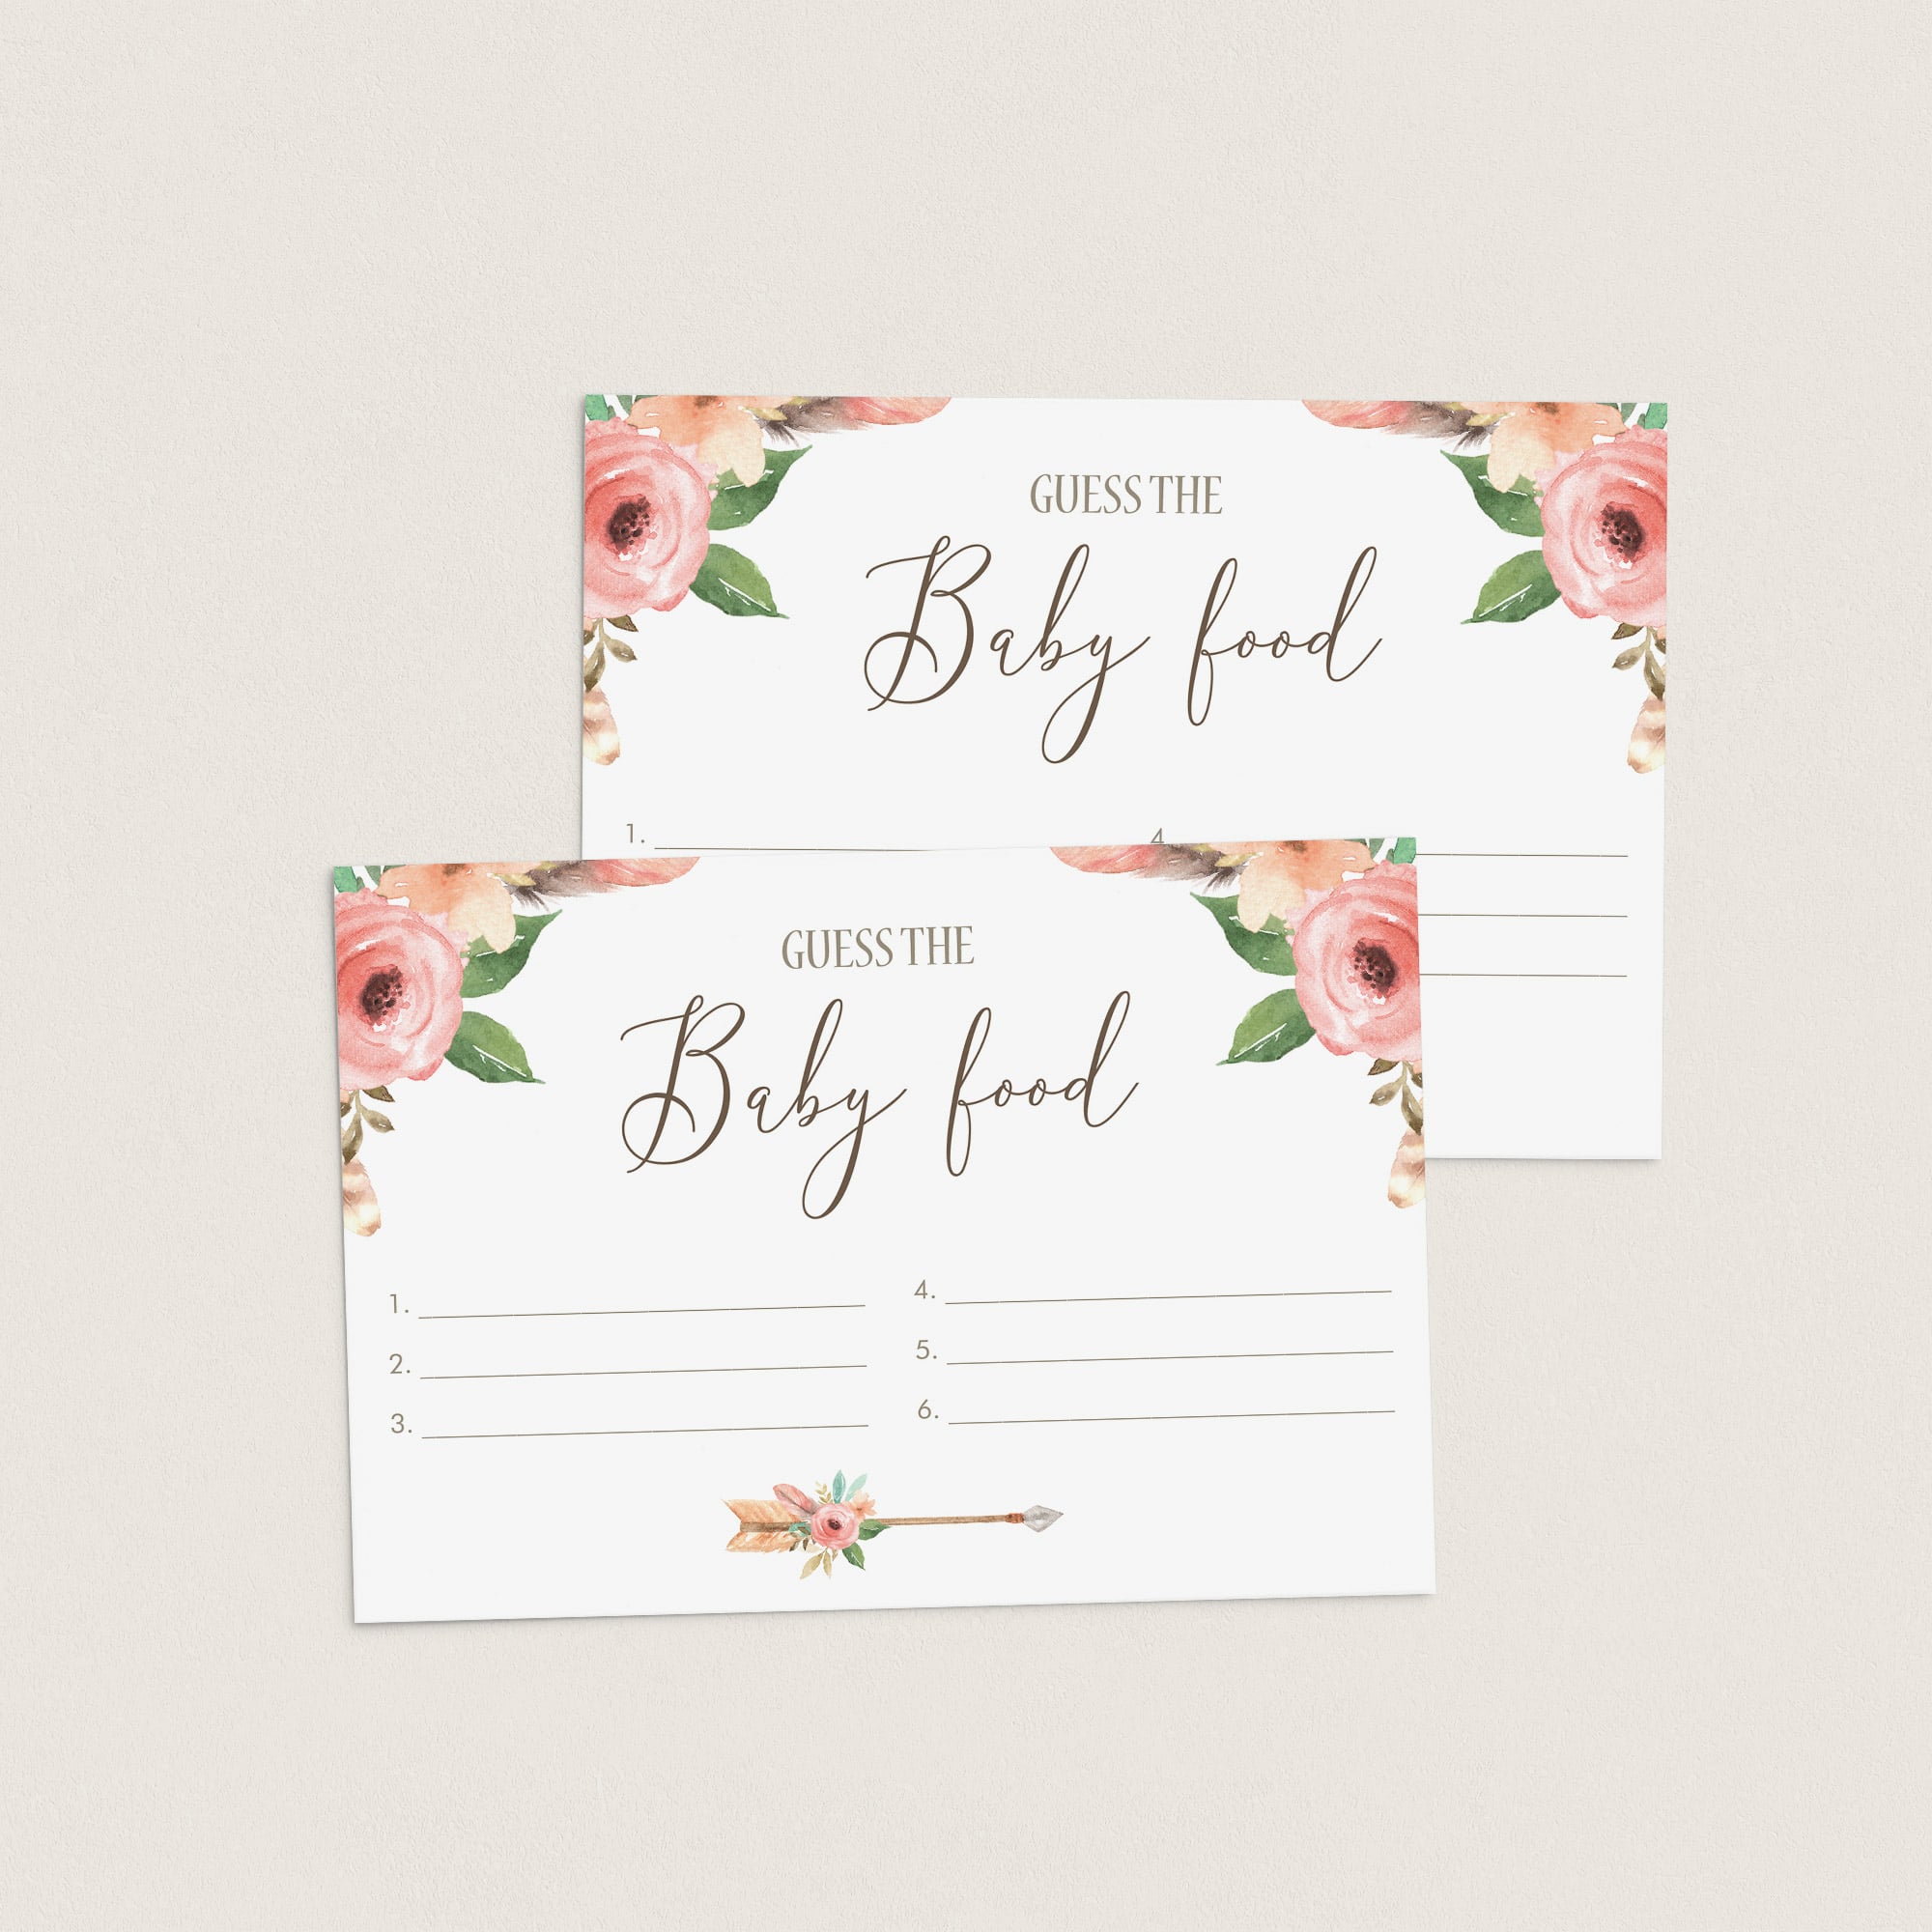 Baby food tasting cards printable by LittleSizzle